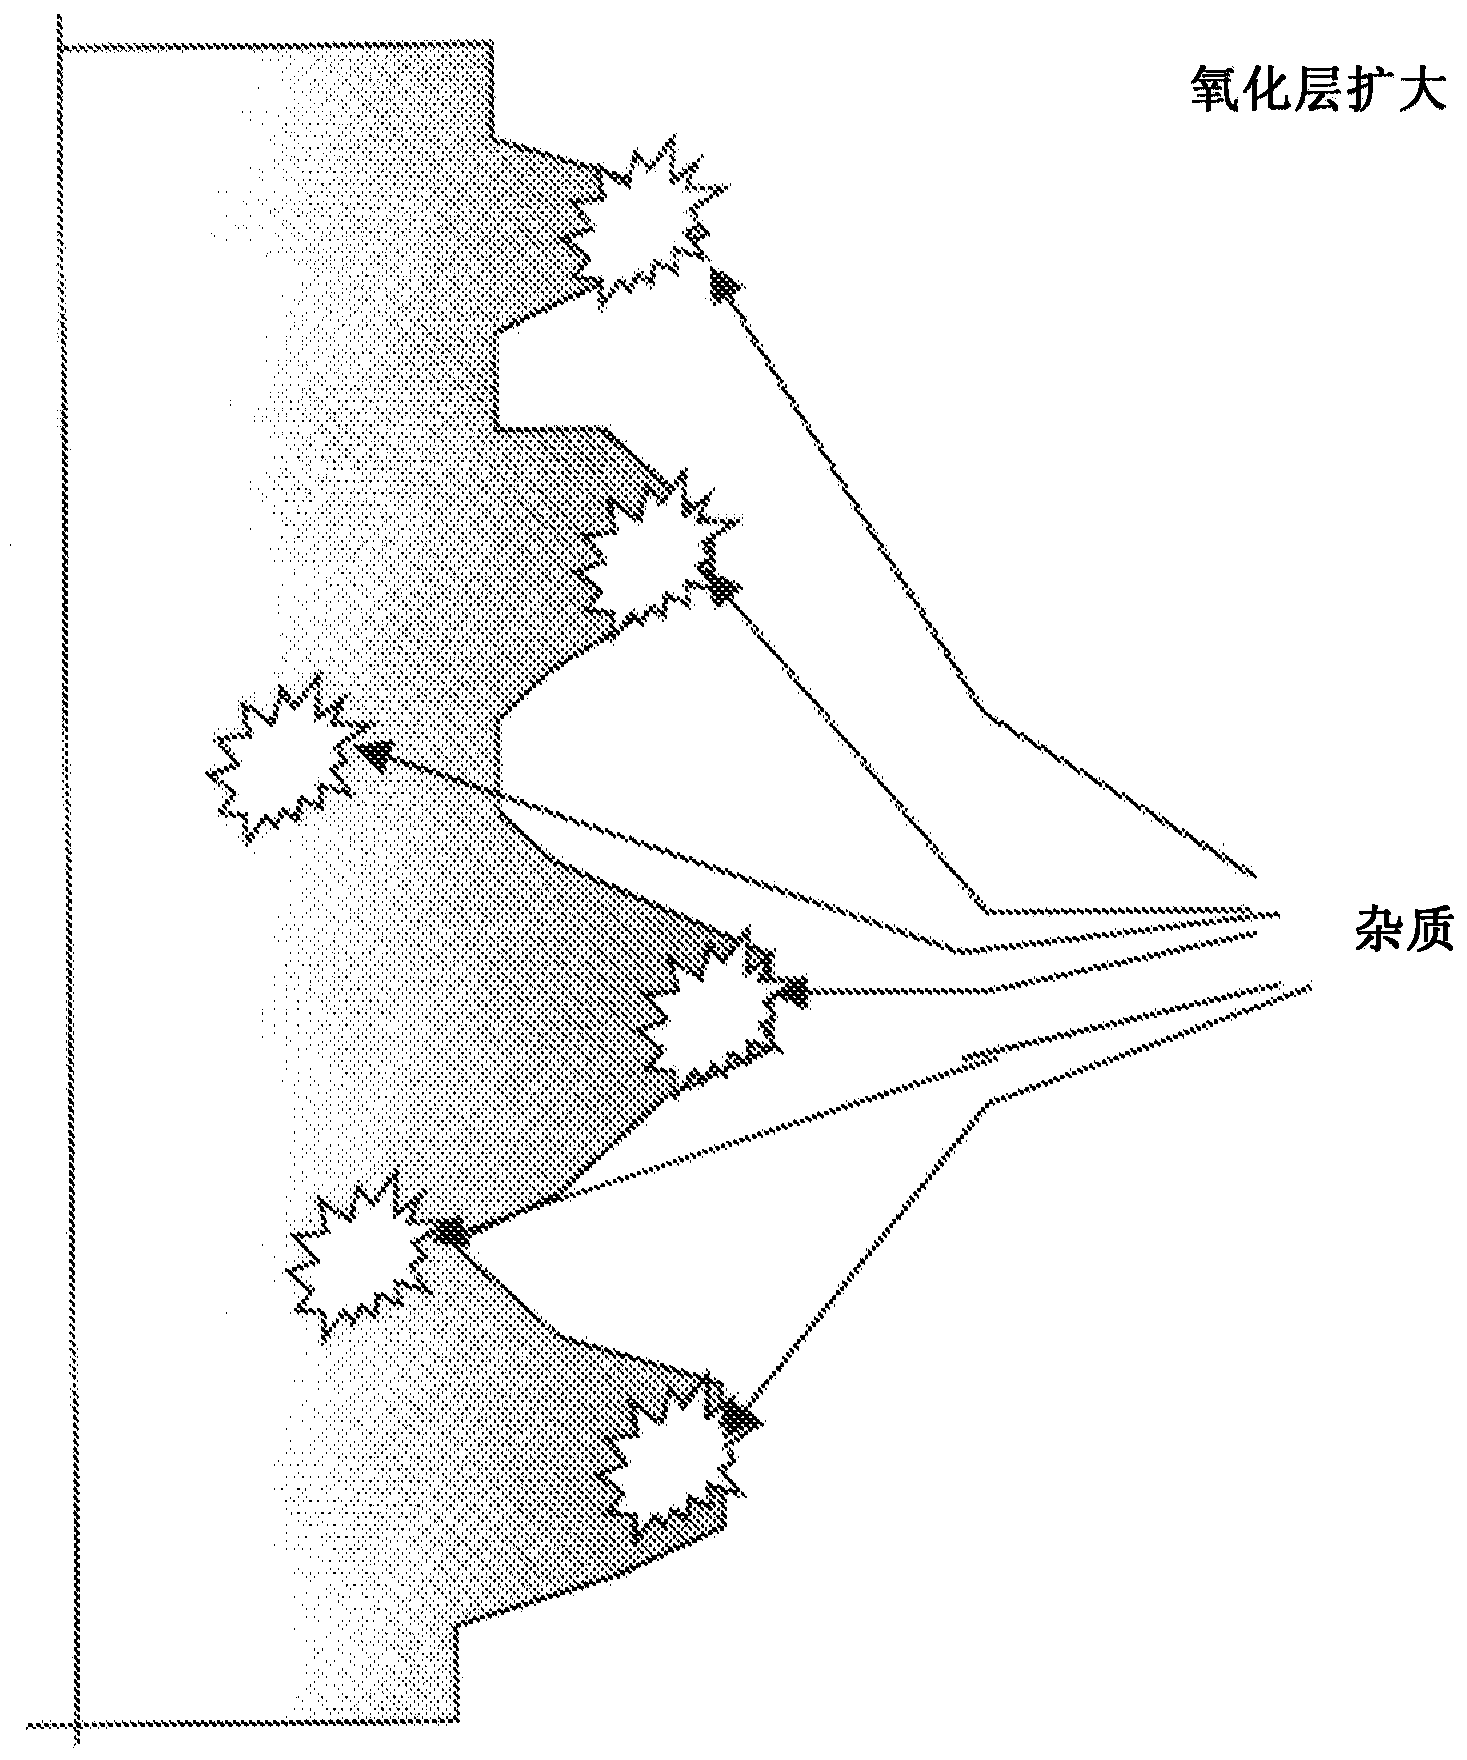 Method for producing indium hydroxide or compound containing indium hydroxide